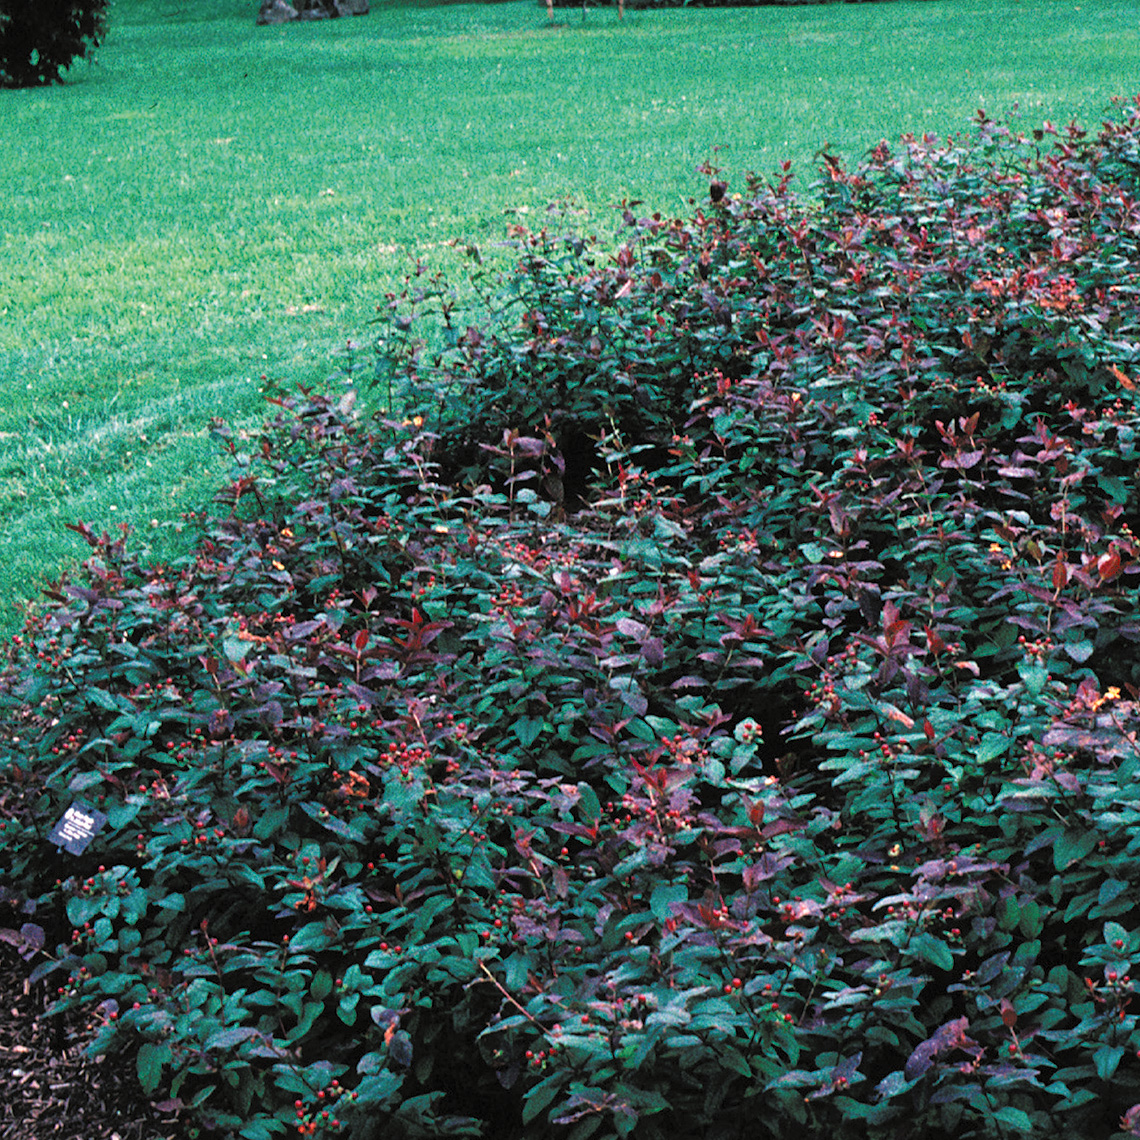 Albury Purple hypericum growing in a bed showing its low habit and purple foliage